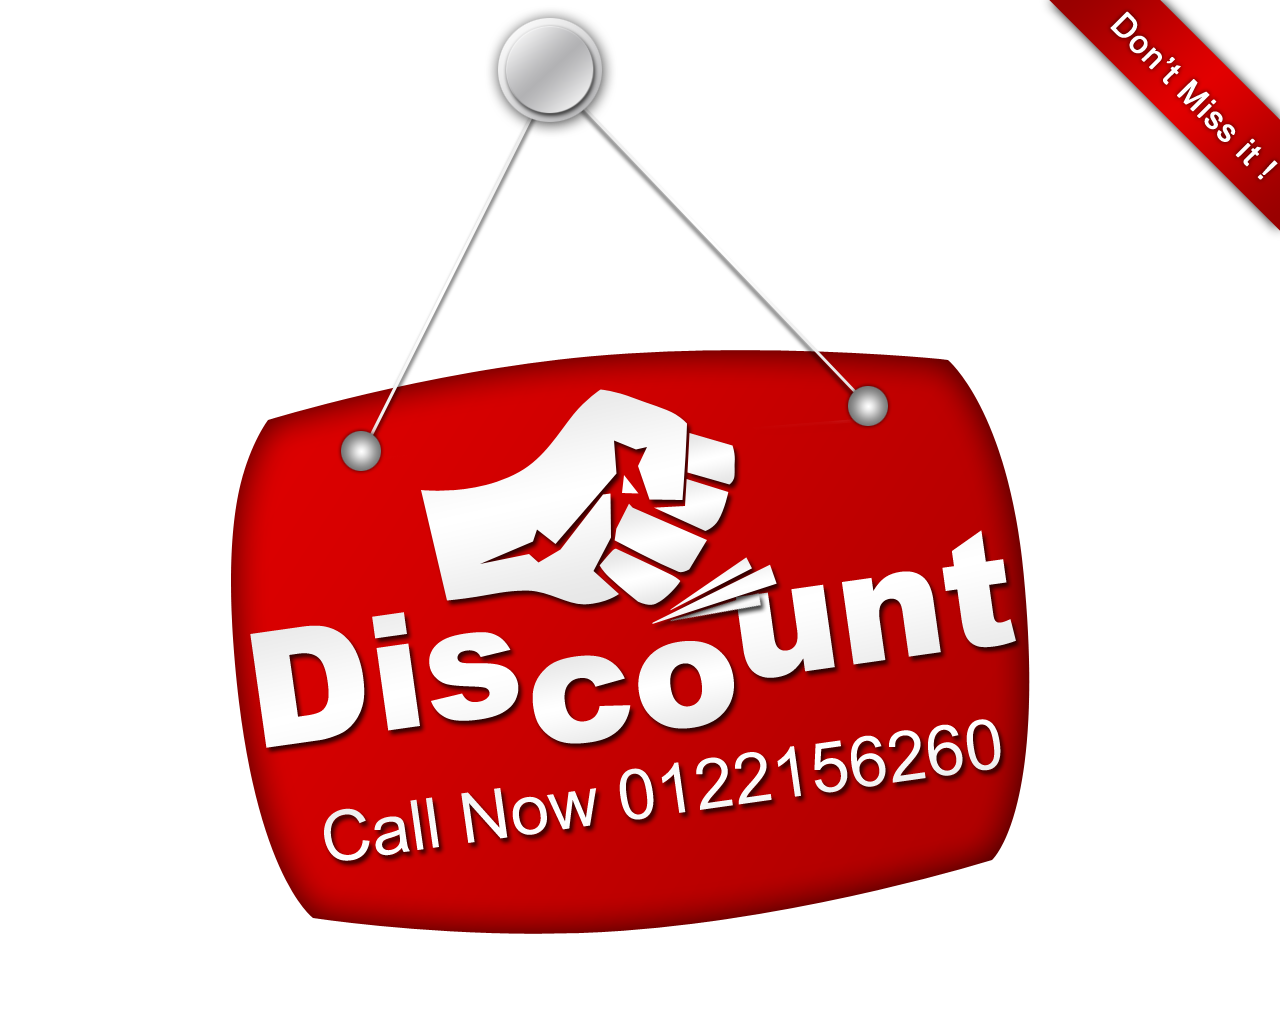 Discount 15 PNG Image, Discount PNG - Free PNG